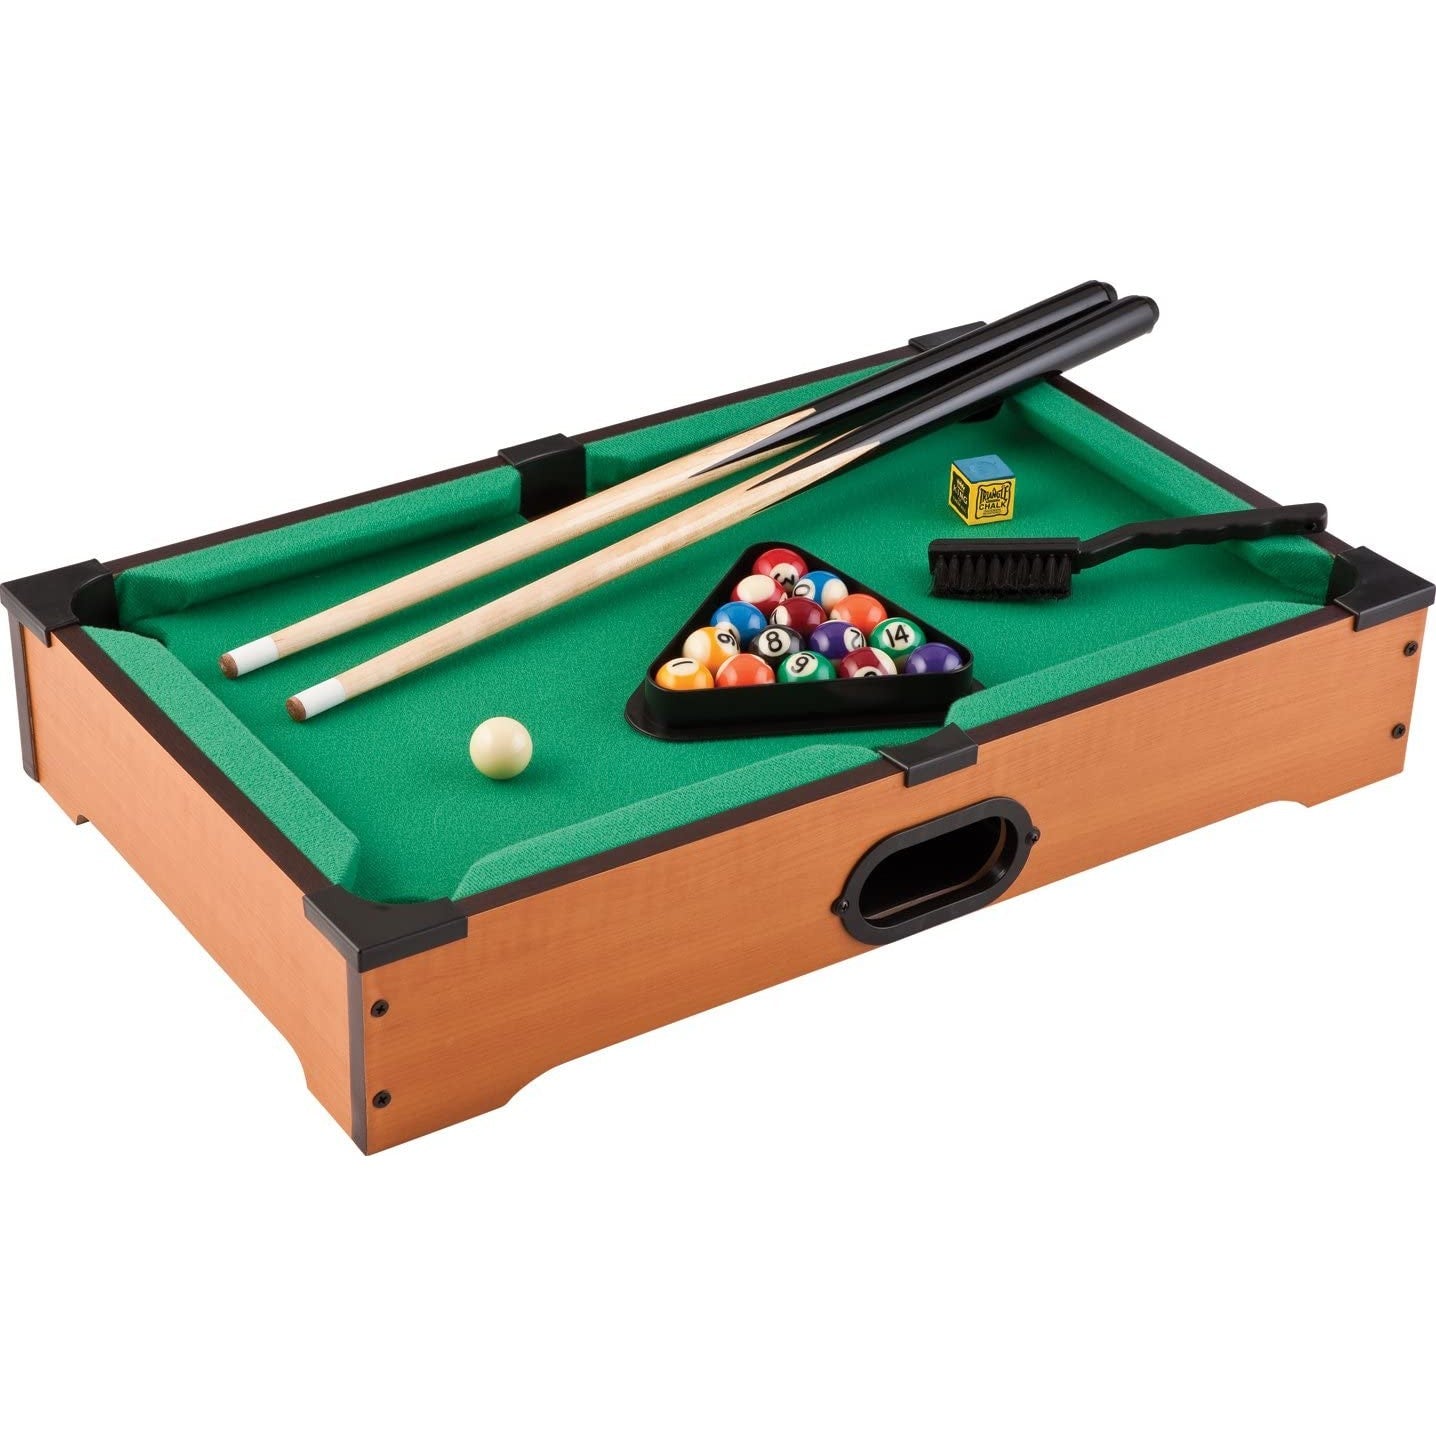 A table-top billiards mini game set complete with all the accessories.